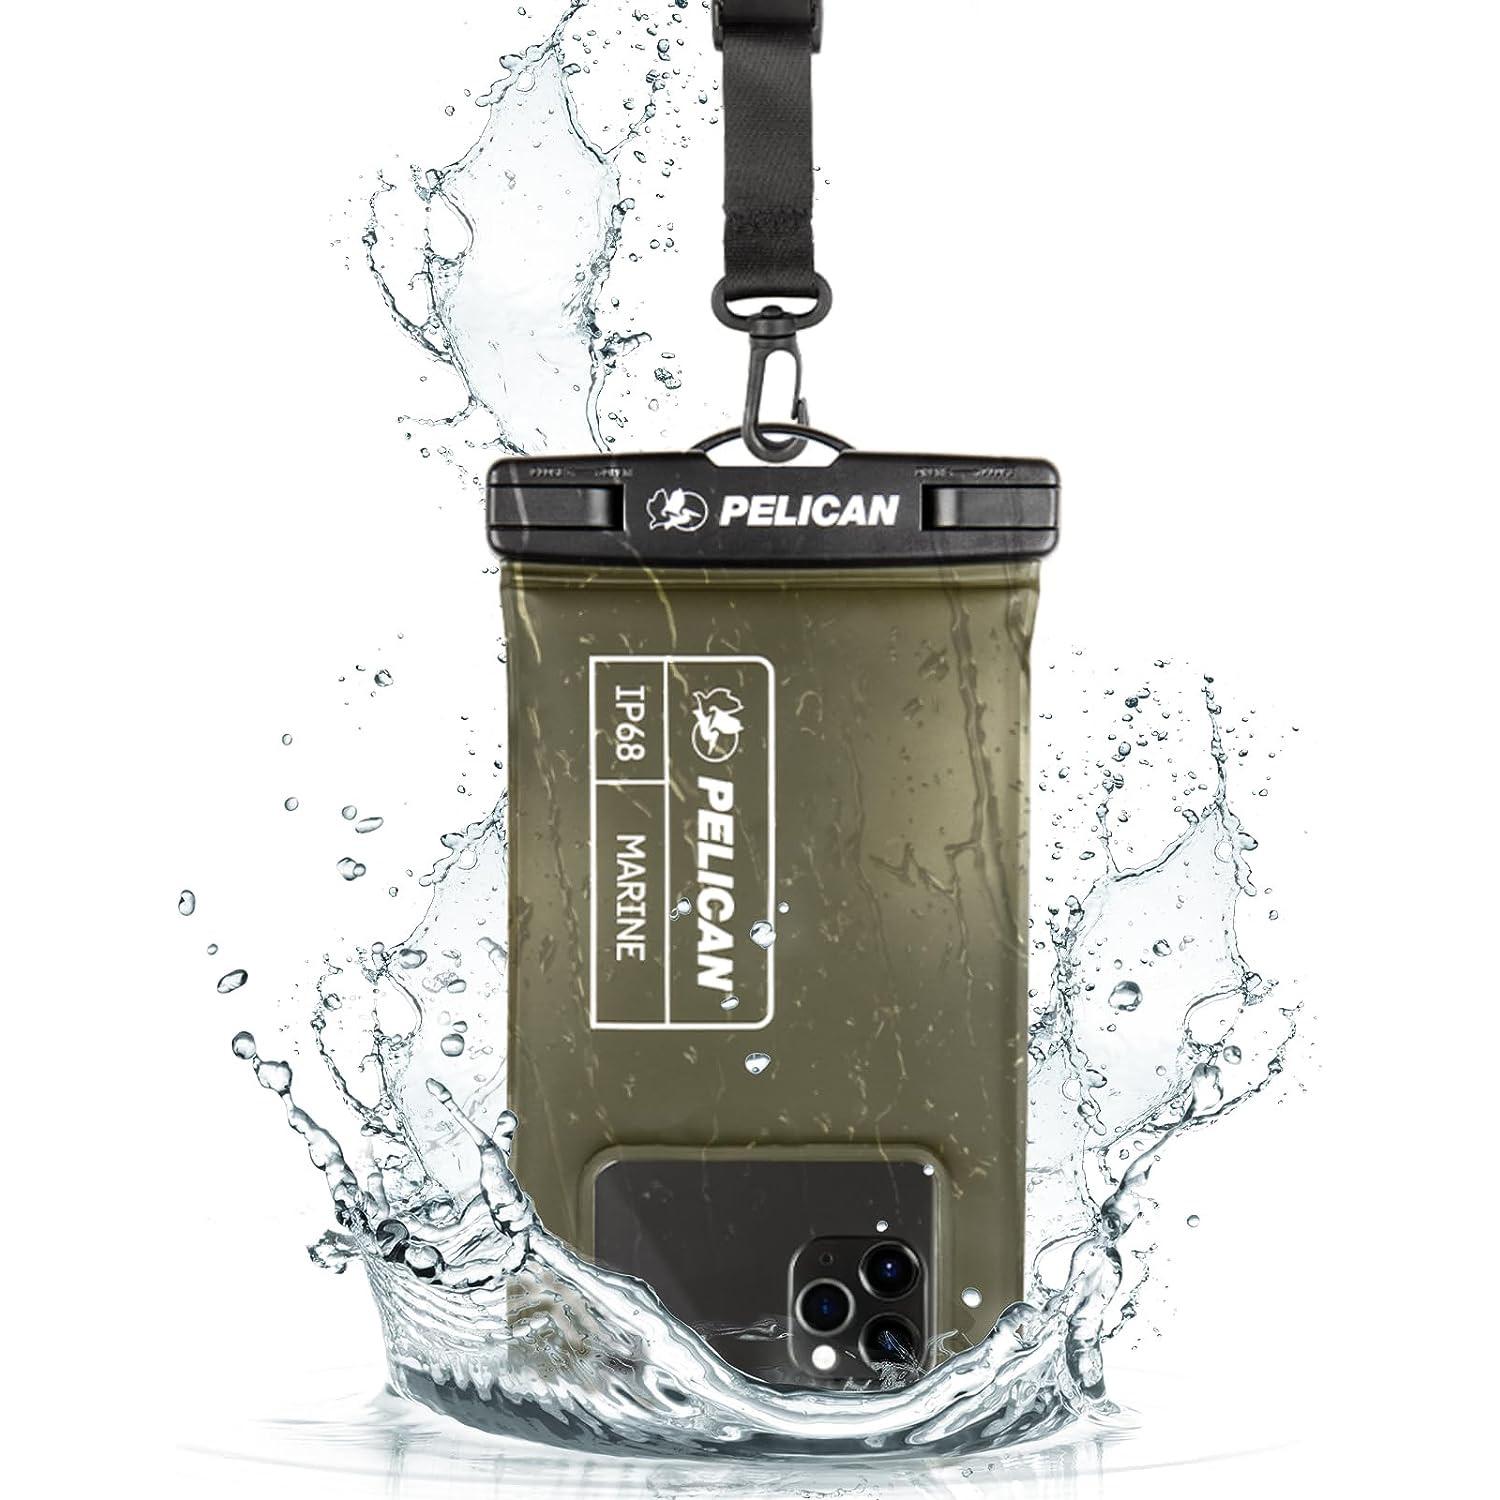 iPhone IP68 Waterproof Phone Pouch by Pelican Marine for $11.24